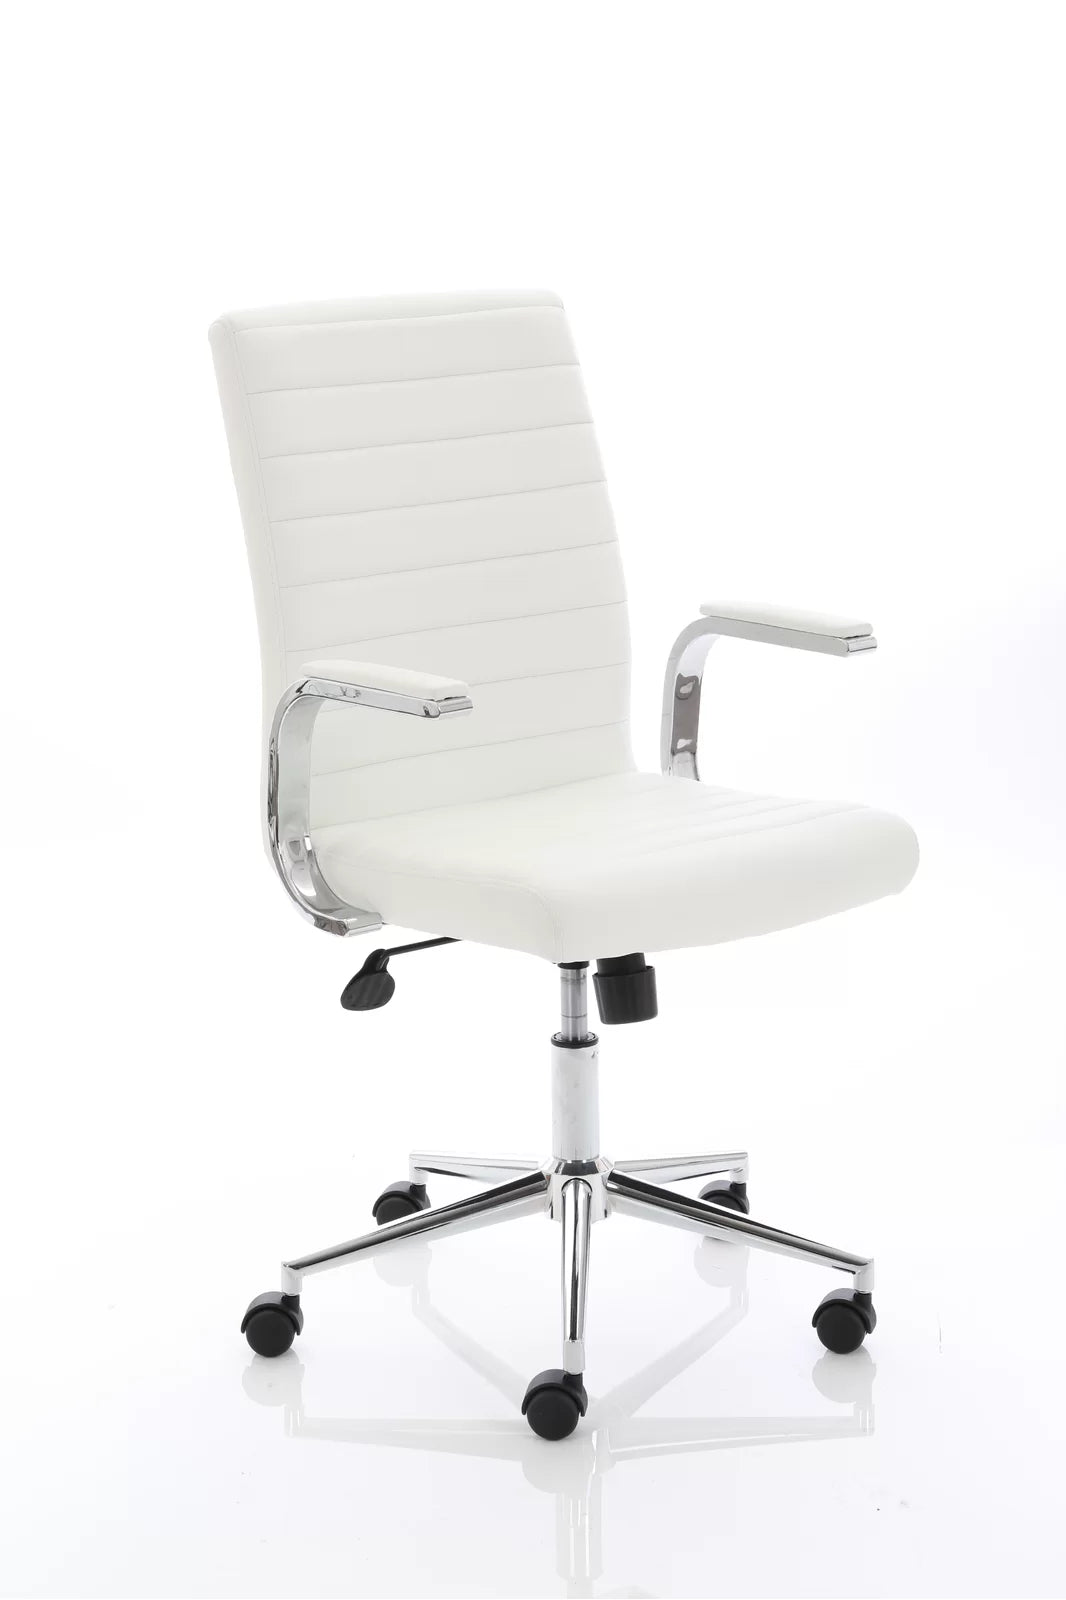 Impulse 1600mm Cantilever Straight Desk With Mobile Pedestal and Ezra White Executive Chair